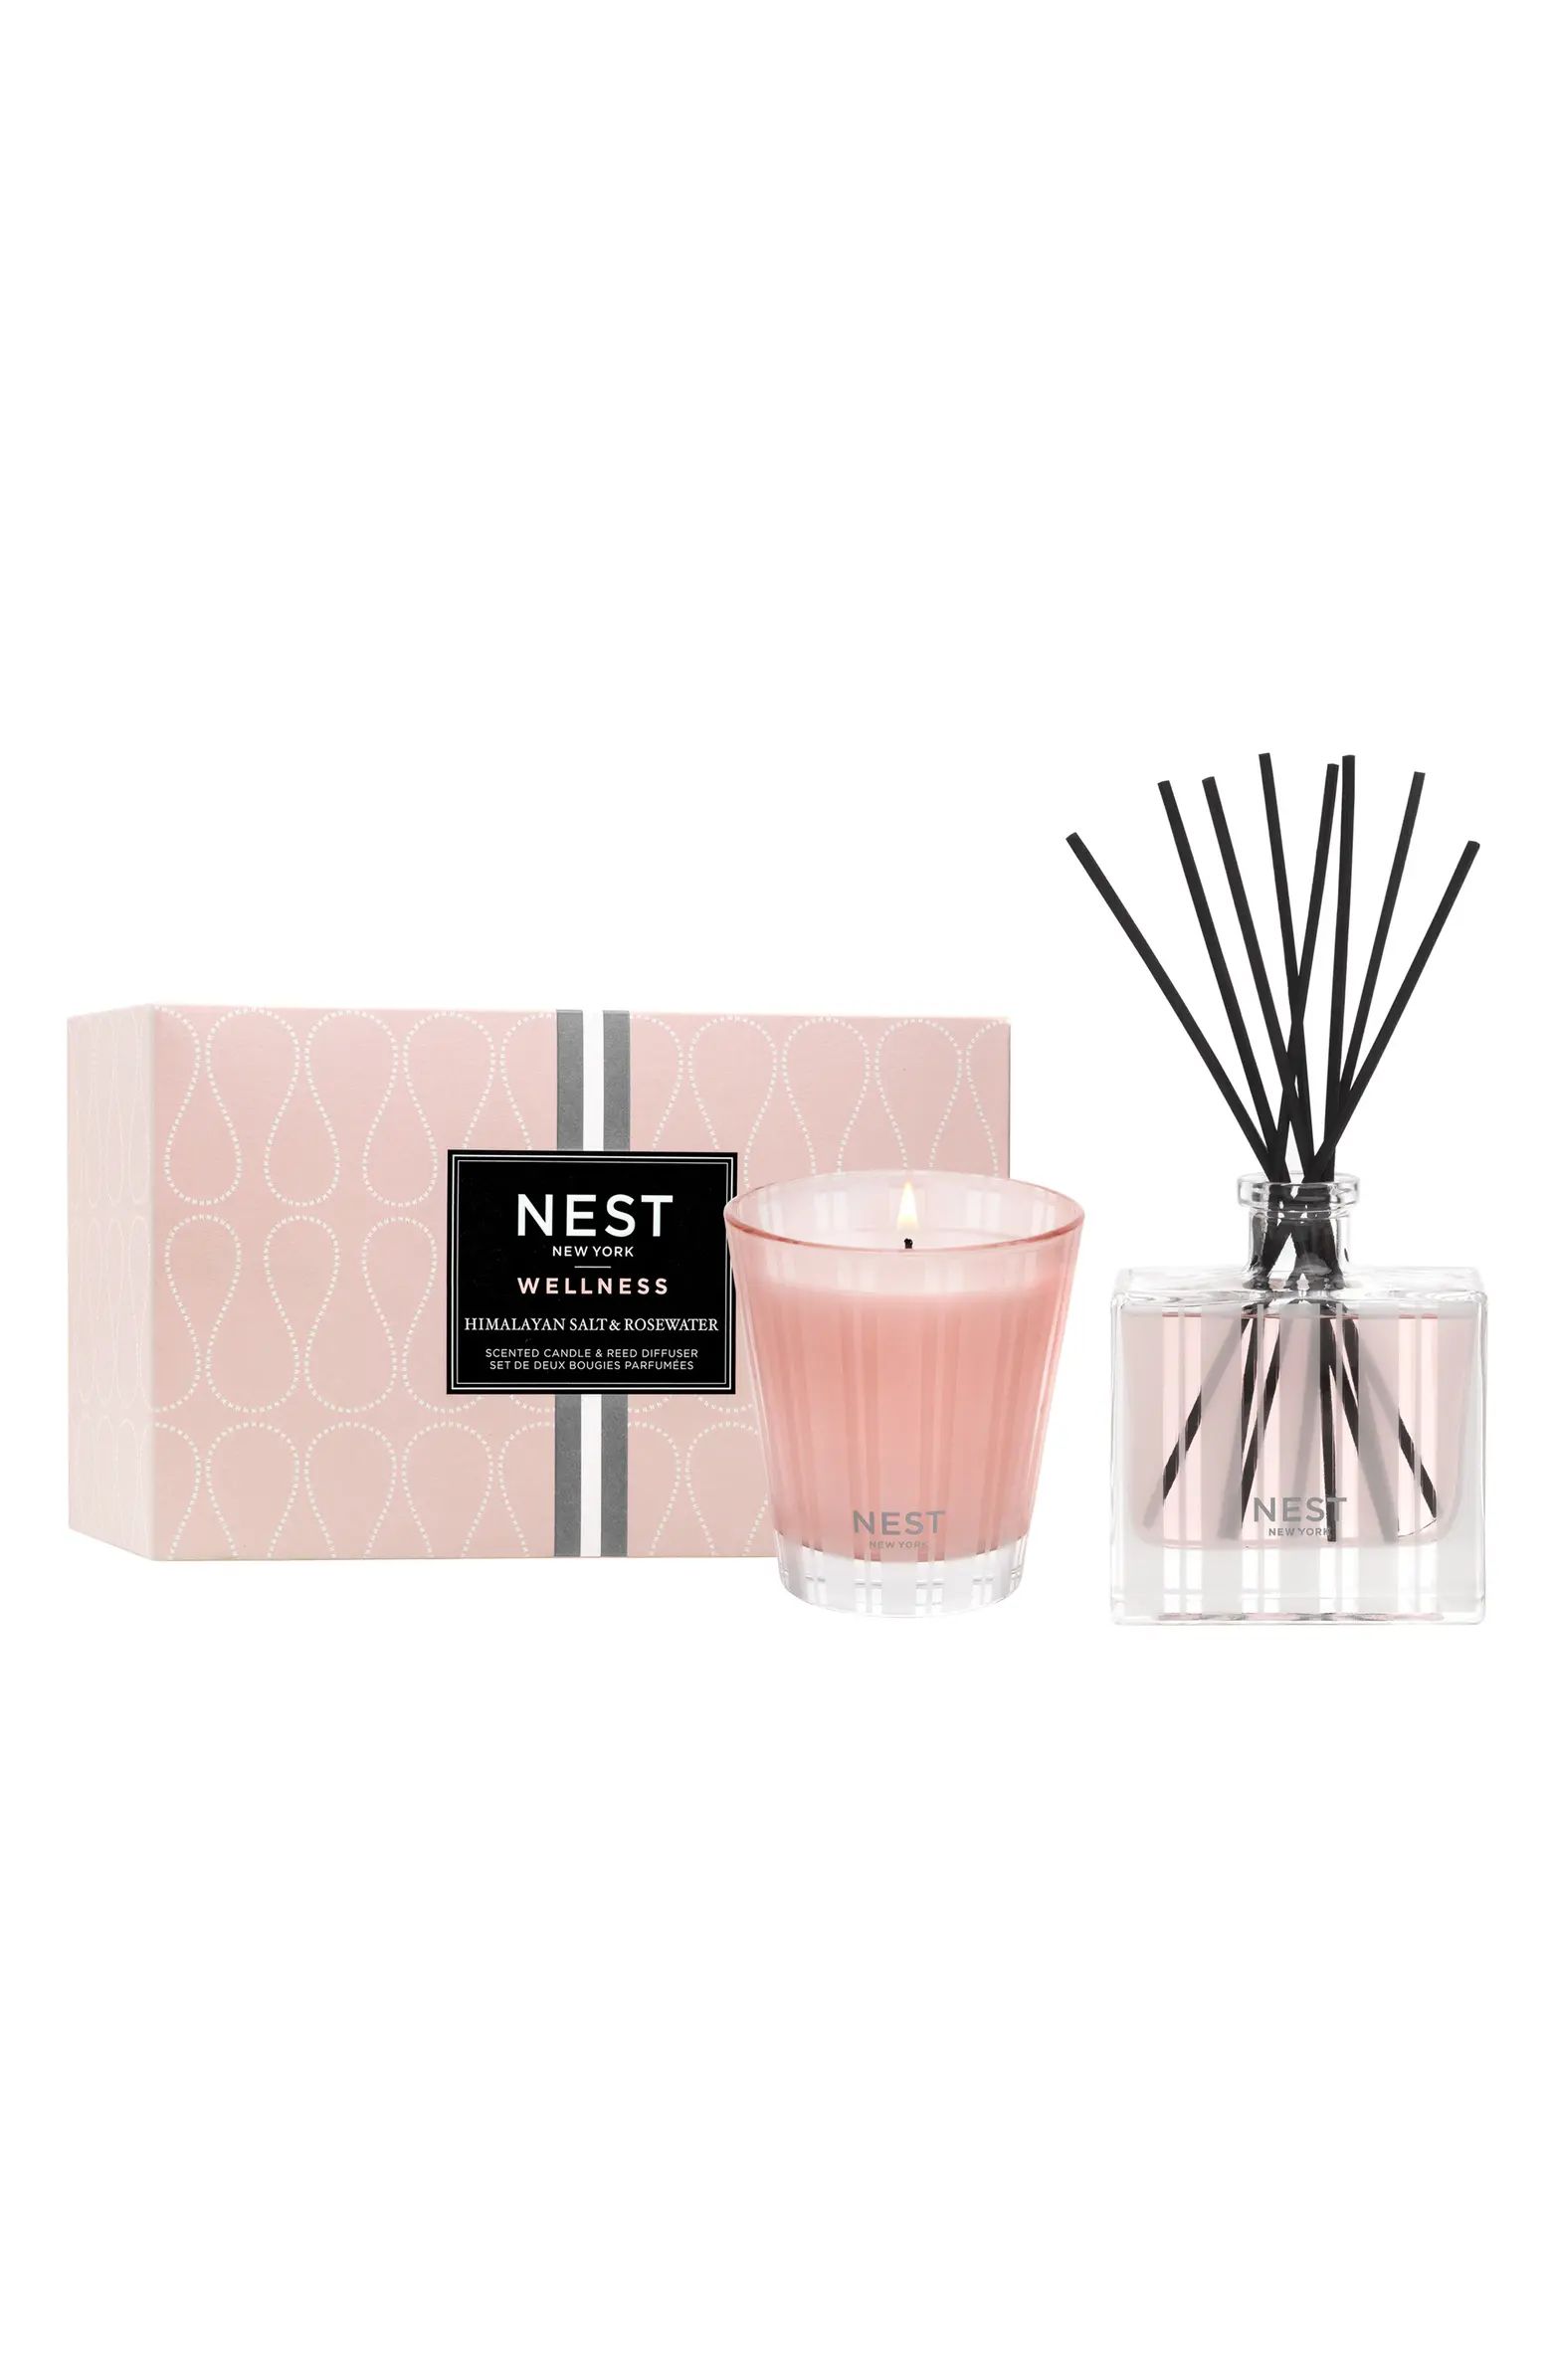 Himalayan Salt & Rosewater Classic Candle & Reed Diffuser Set $110 Value | Nordstrom